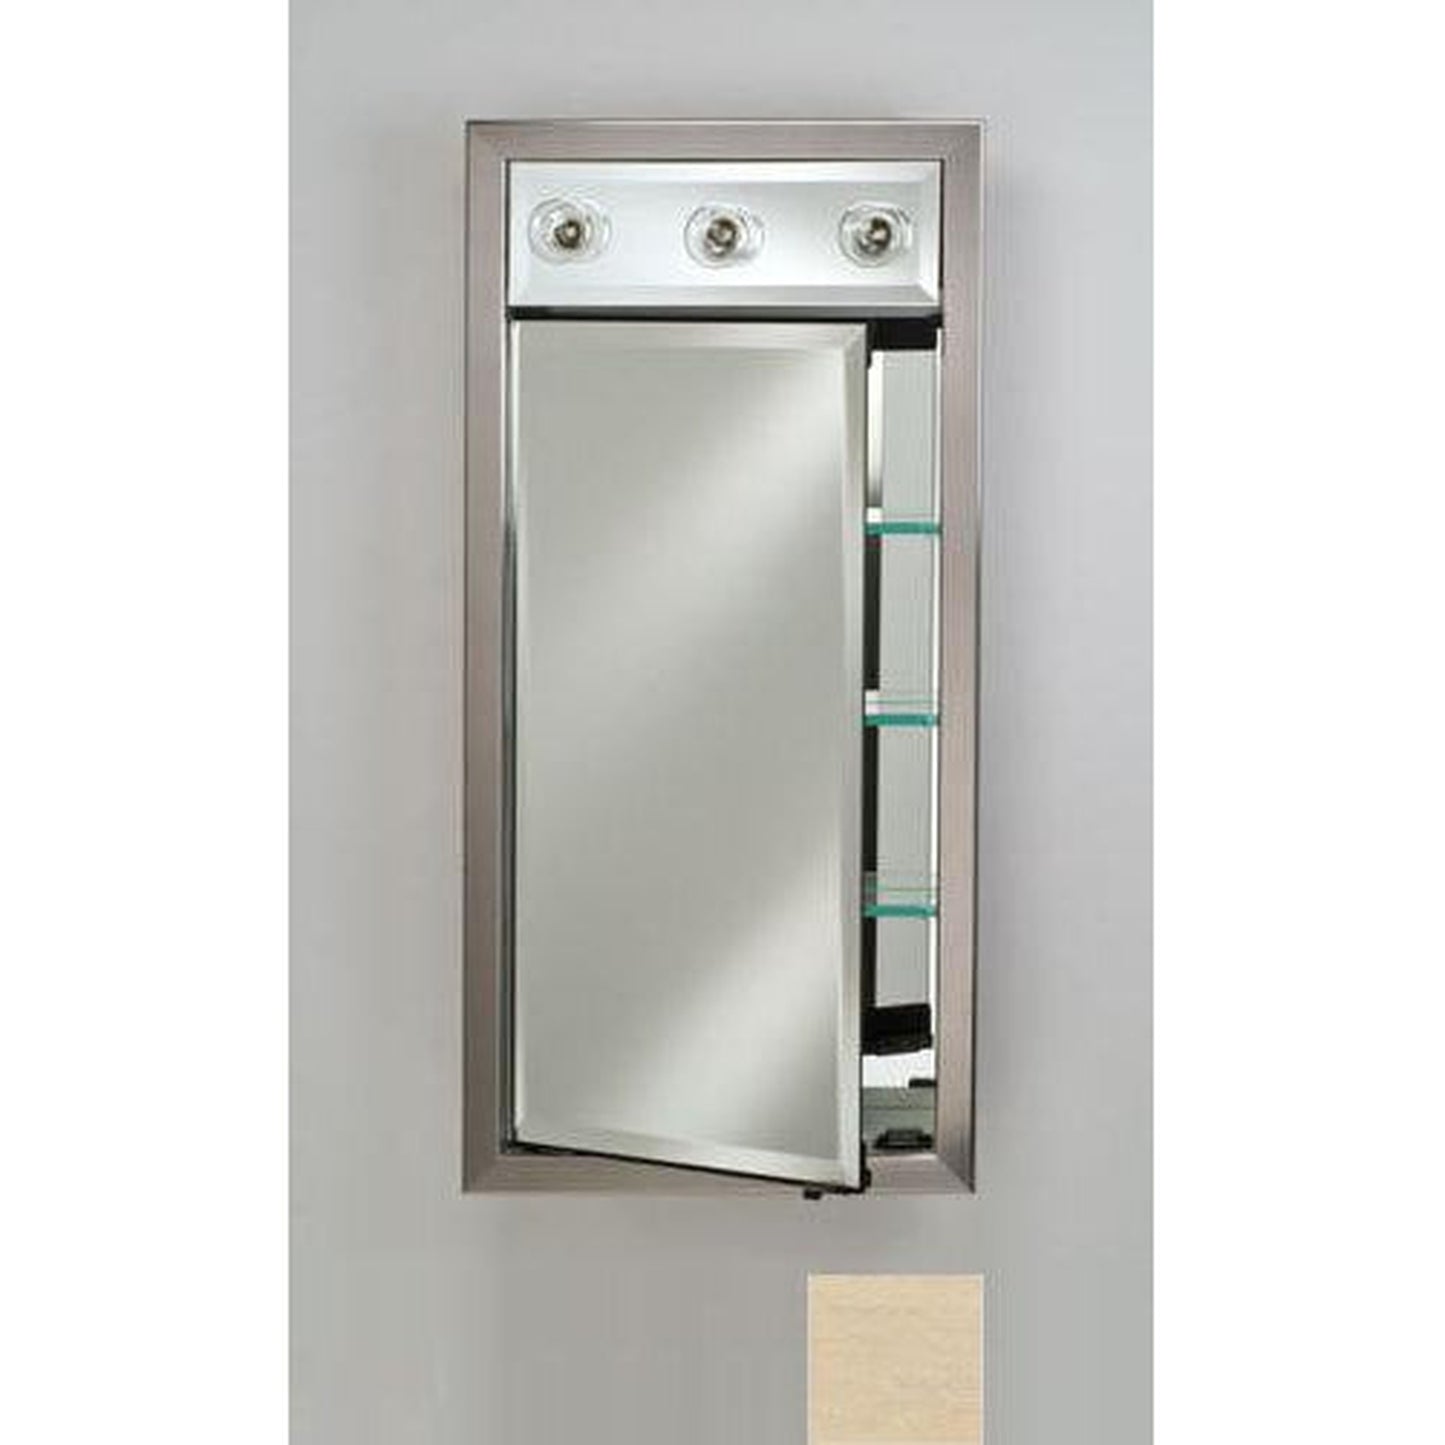 Afina Signature 17" x 30" Arlington Pickled Recessed Right Hinged Single Door Medicine Cabinet With Contemporary Lights